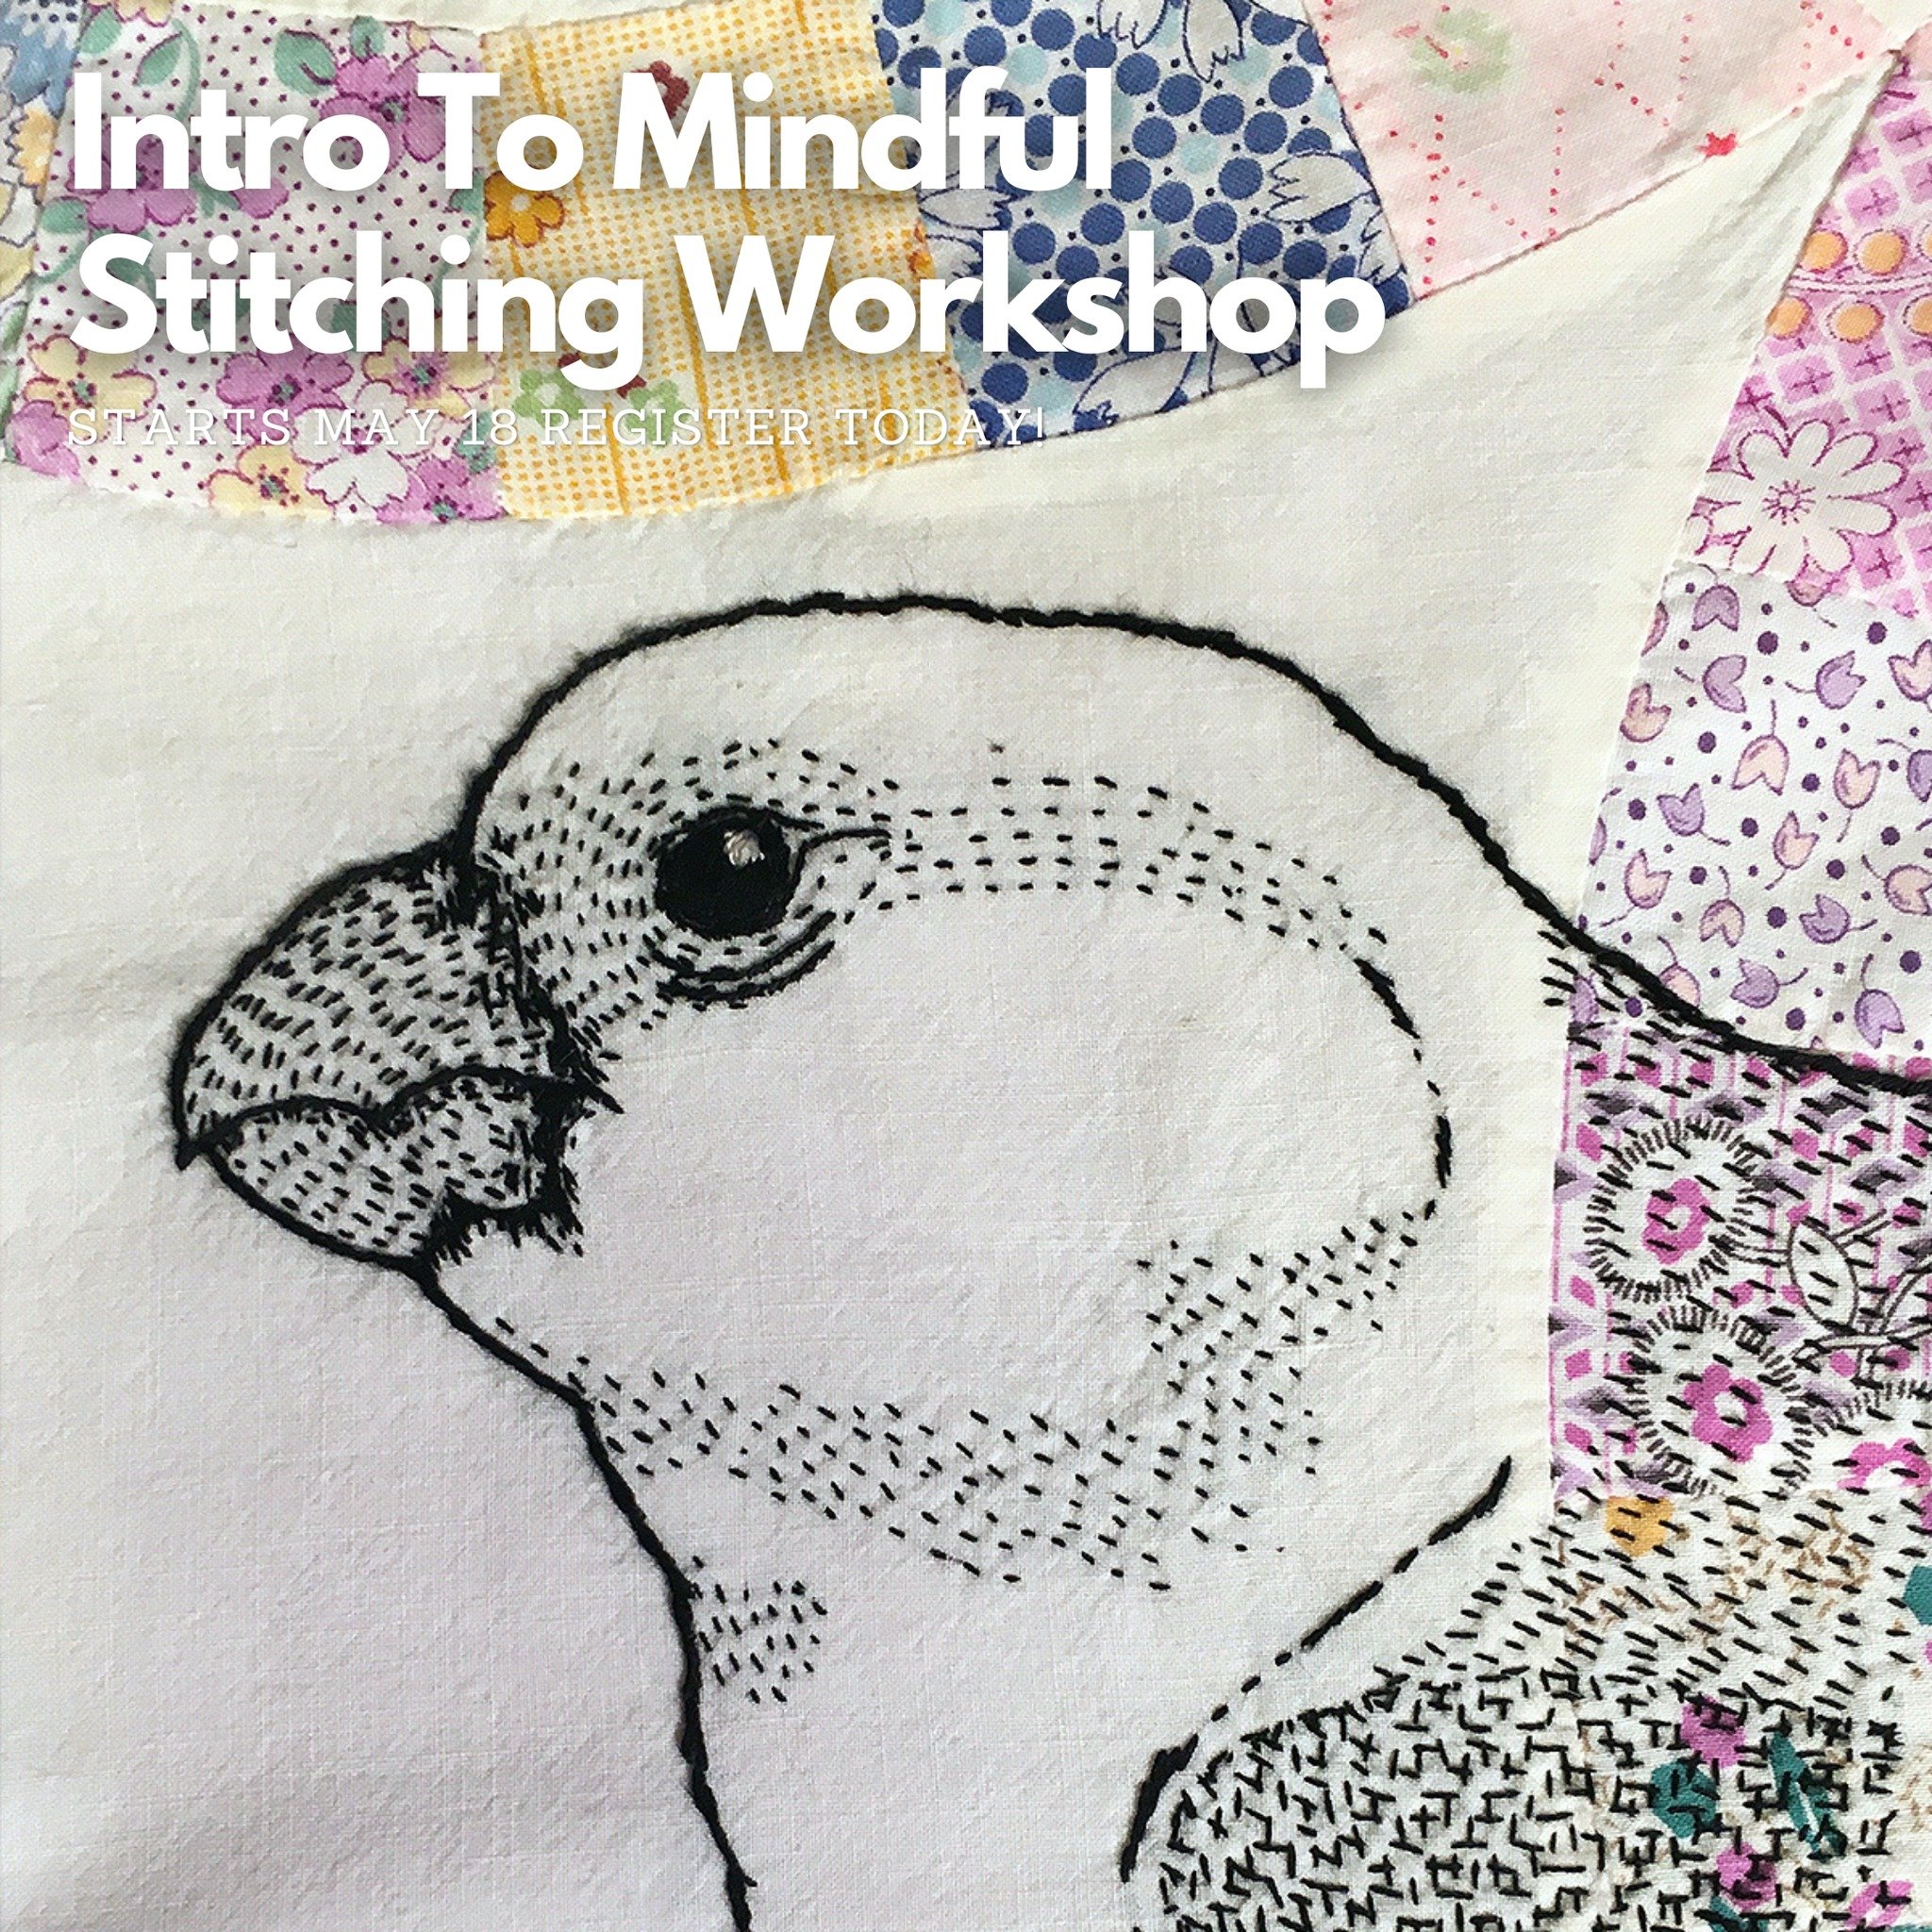 Need a mental break? Find ease in the meditative and creative process of stitching. Register today for our Intro to Mindful Stitching workshop.

🟣 Intro to Mindful Stitching Workshop (18+) 1-day workshop / Saturday, May 18 from 1-4 PM

With guidance